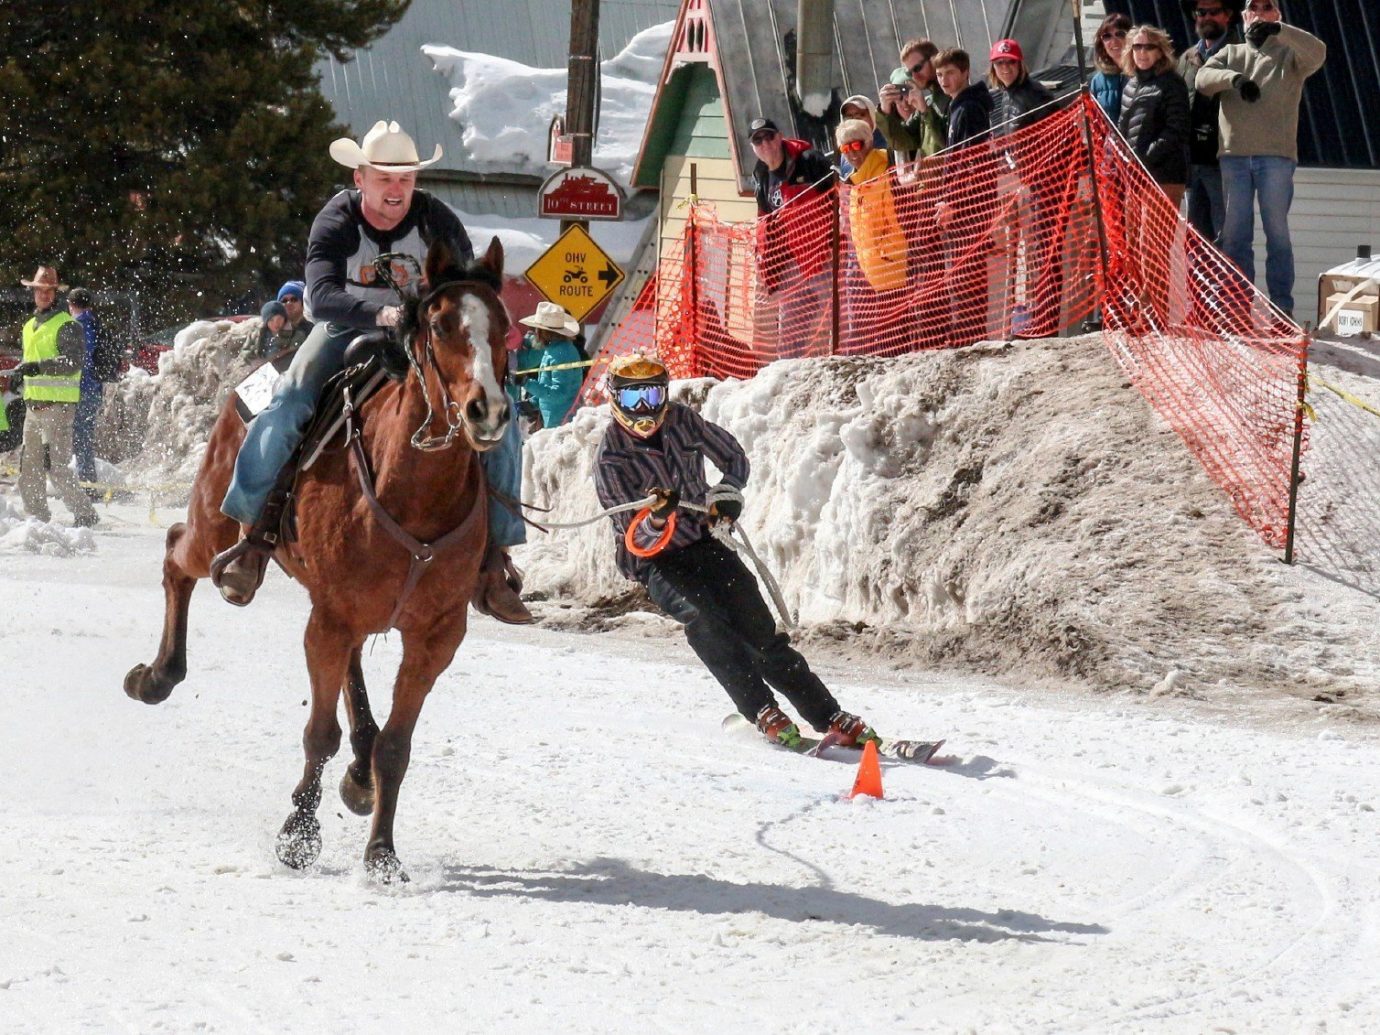 Offbeat Trip Ideas outdoor snow sports animal sports equestrian sport equestrianism tradition racing